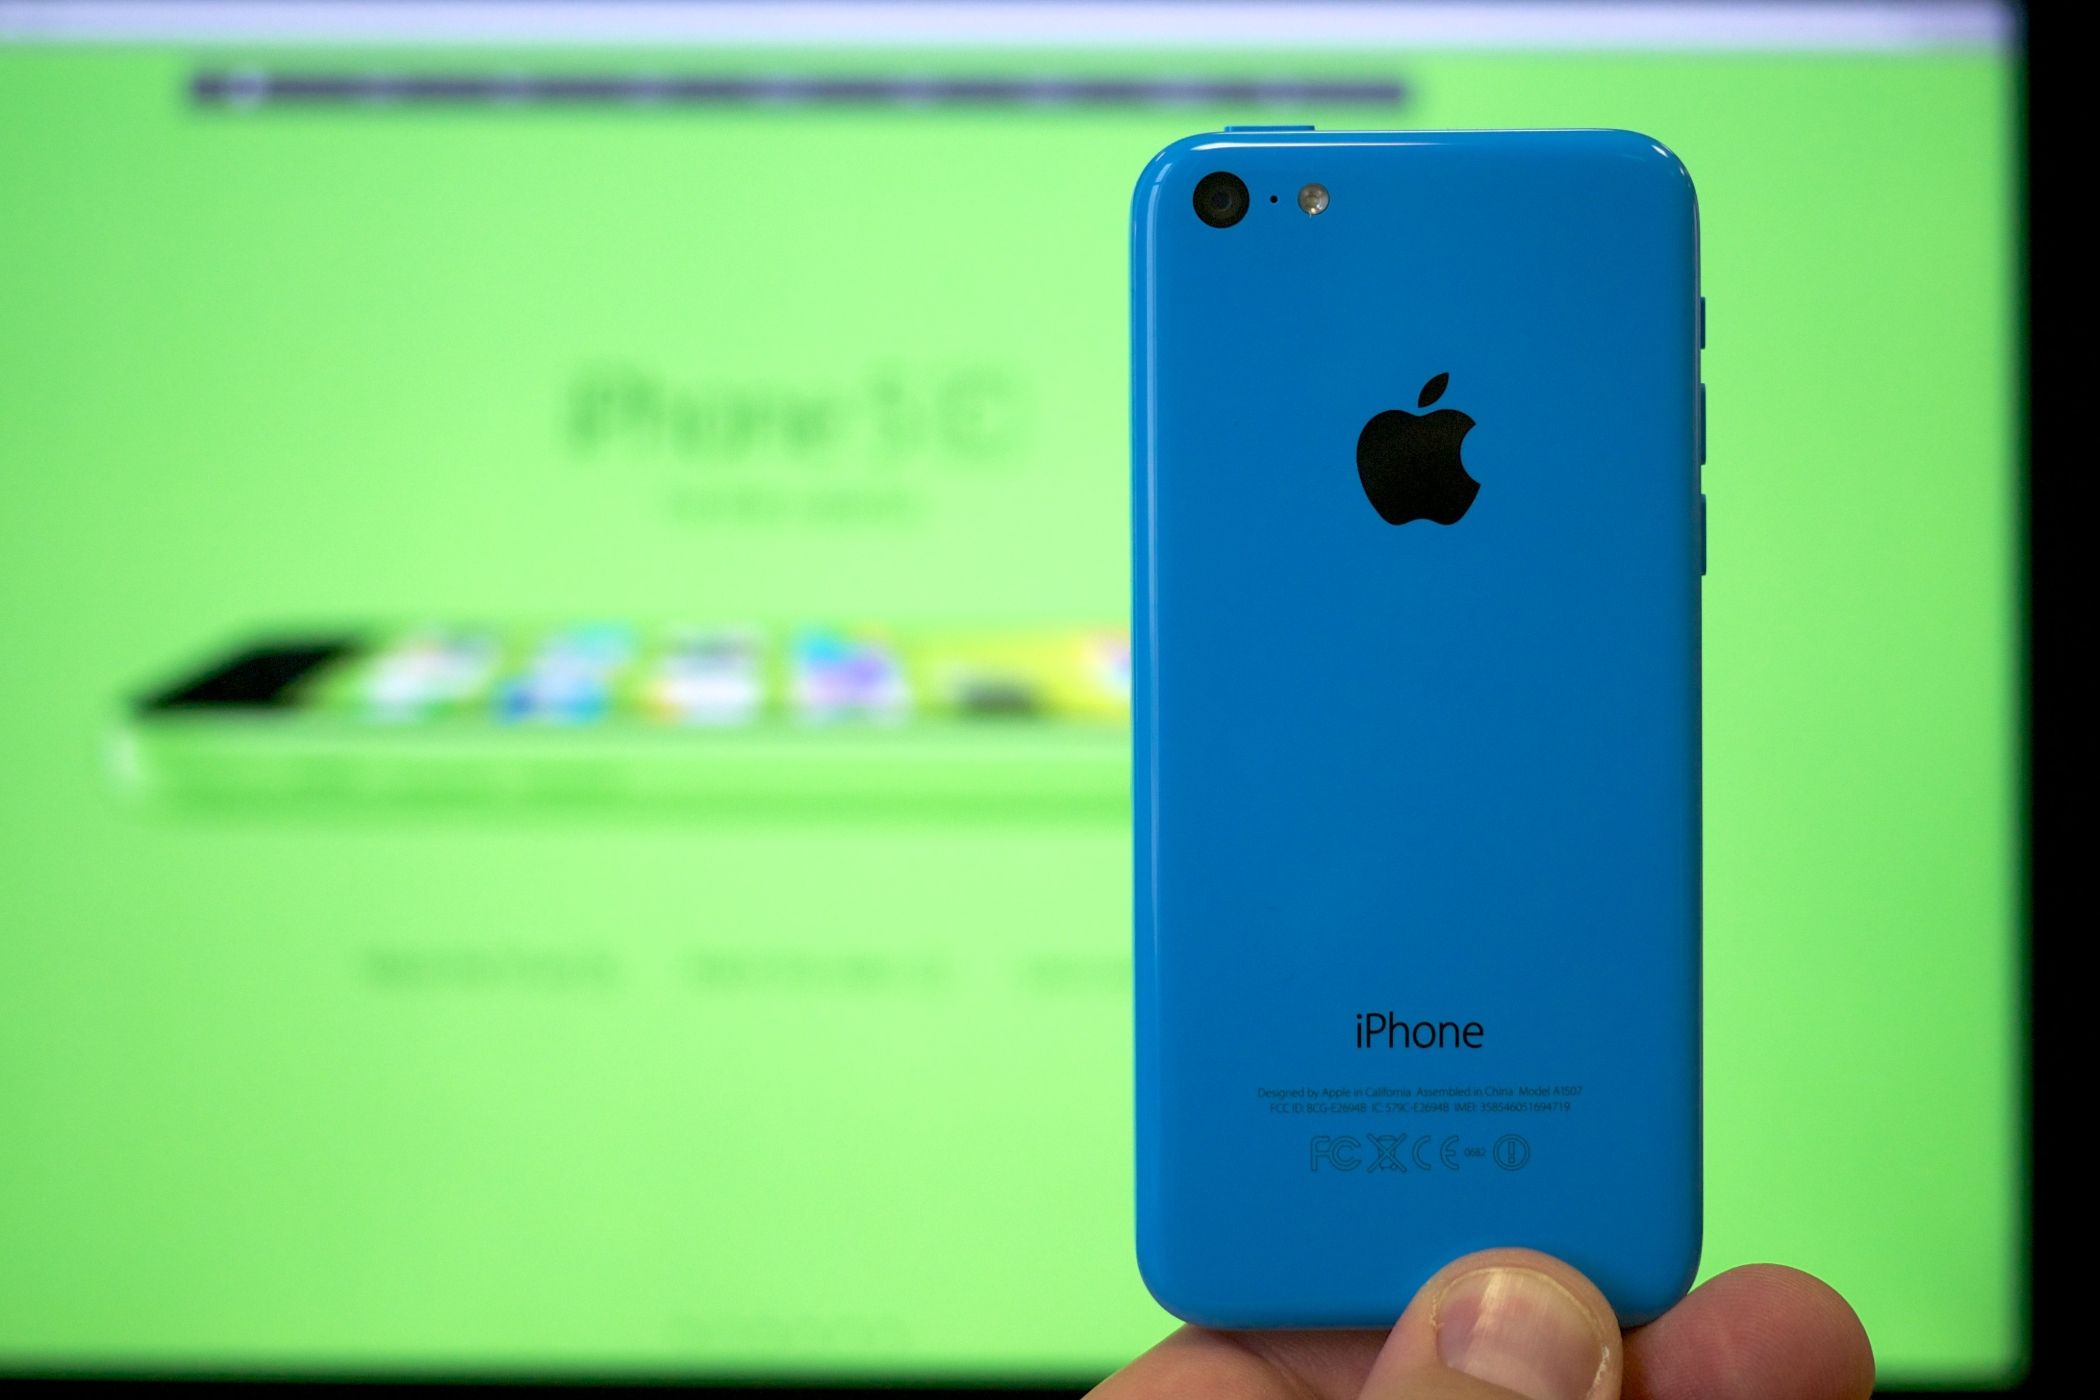 Back of the iPhone 5c blue variant against a big green display